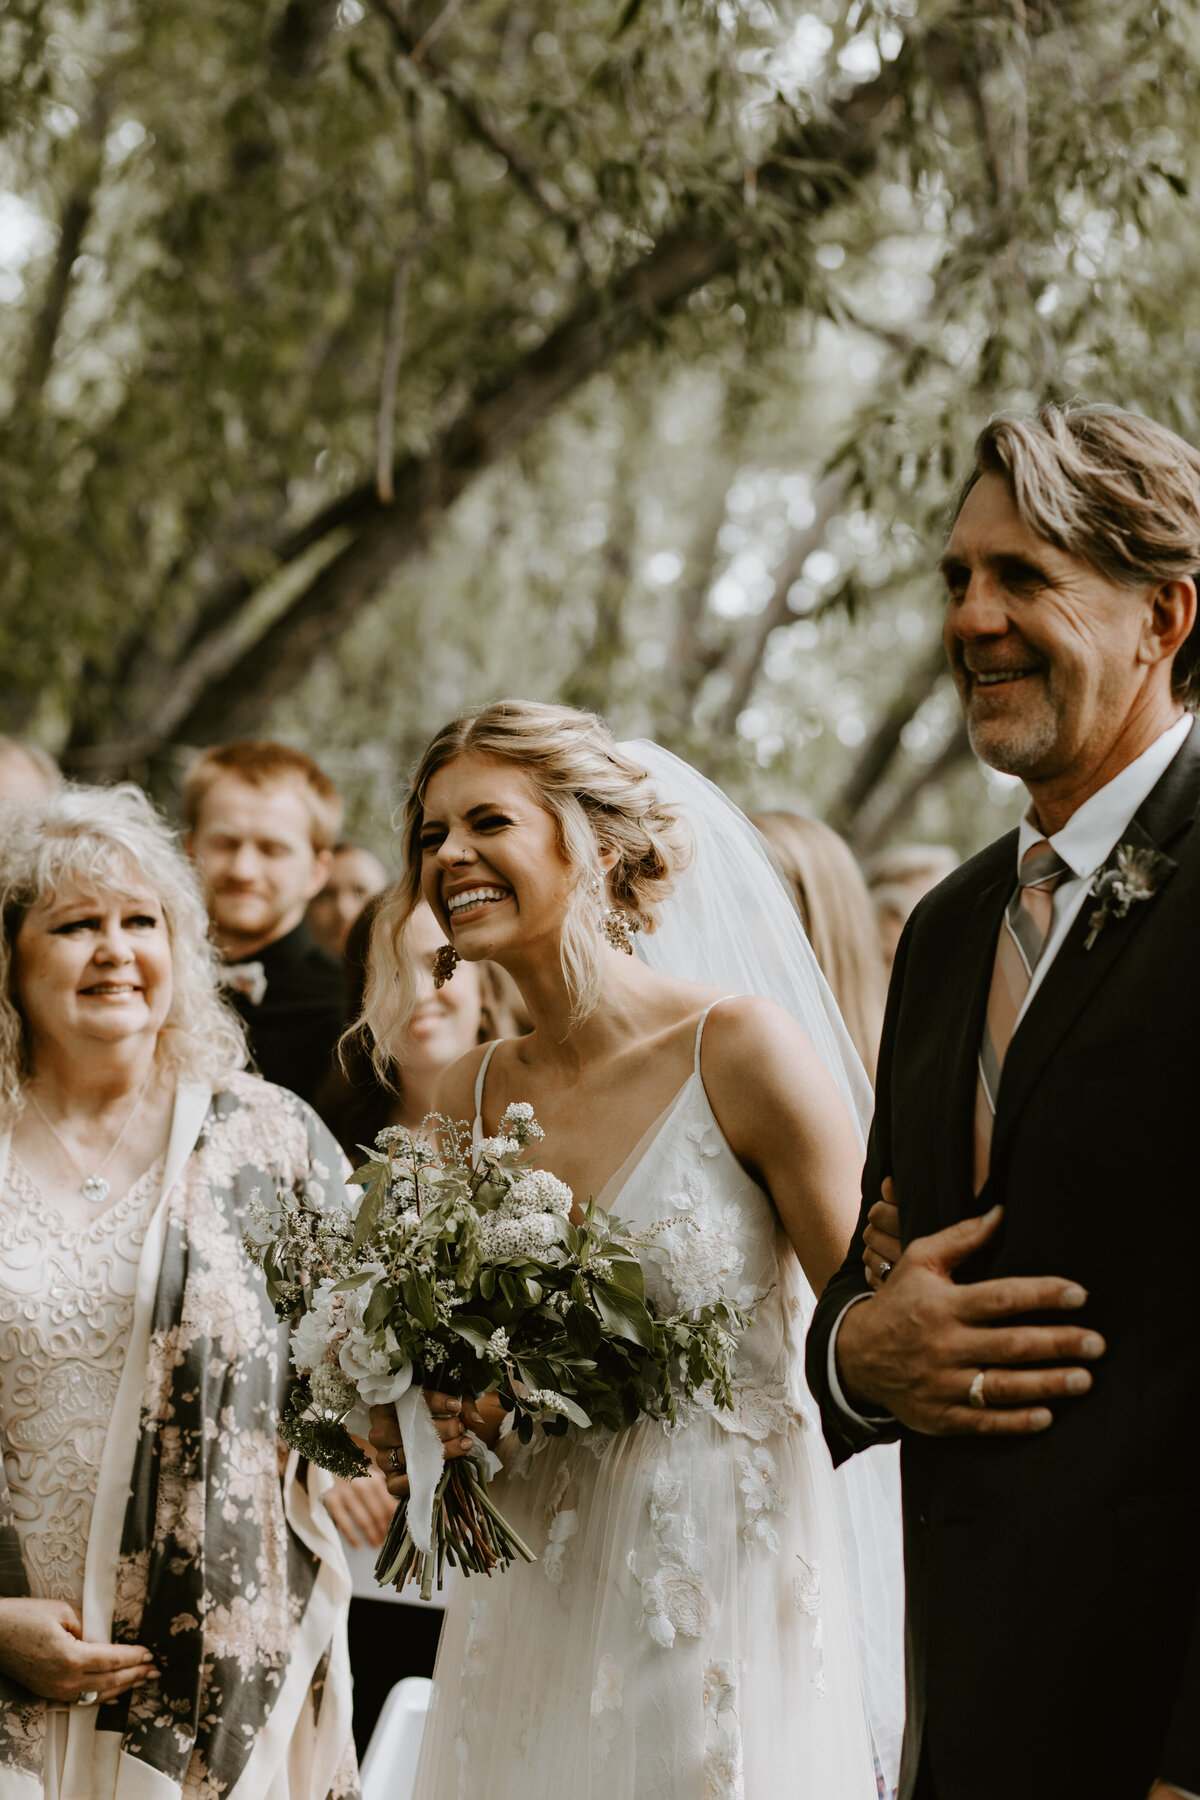 Documentary style image of bride smiling at her groom during wedding ceremony captured by Tim & Court Photo and Film, joyful and adventurous wedding photographer and videographer in Calgary, Alberta. Featured on the Bronte Bride Vendor Guide.